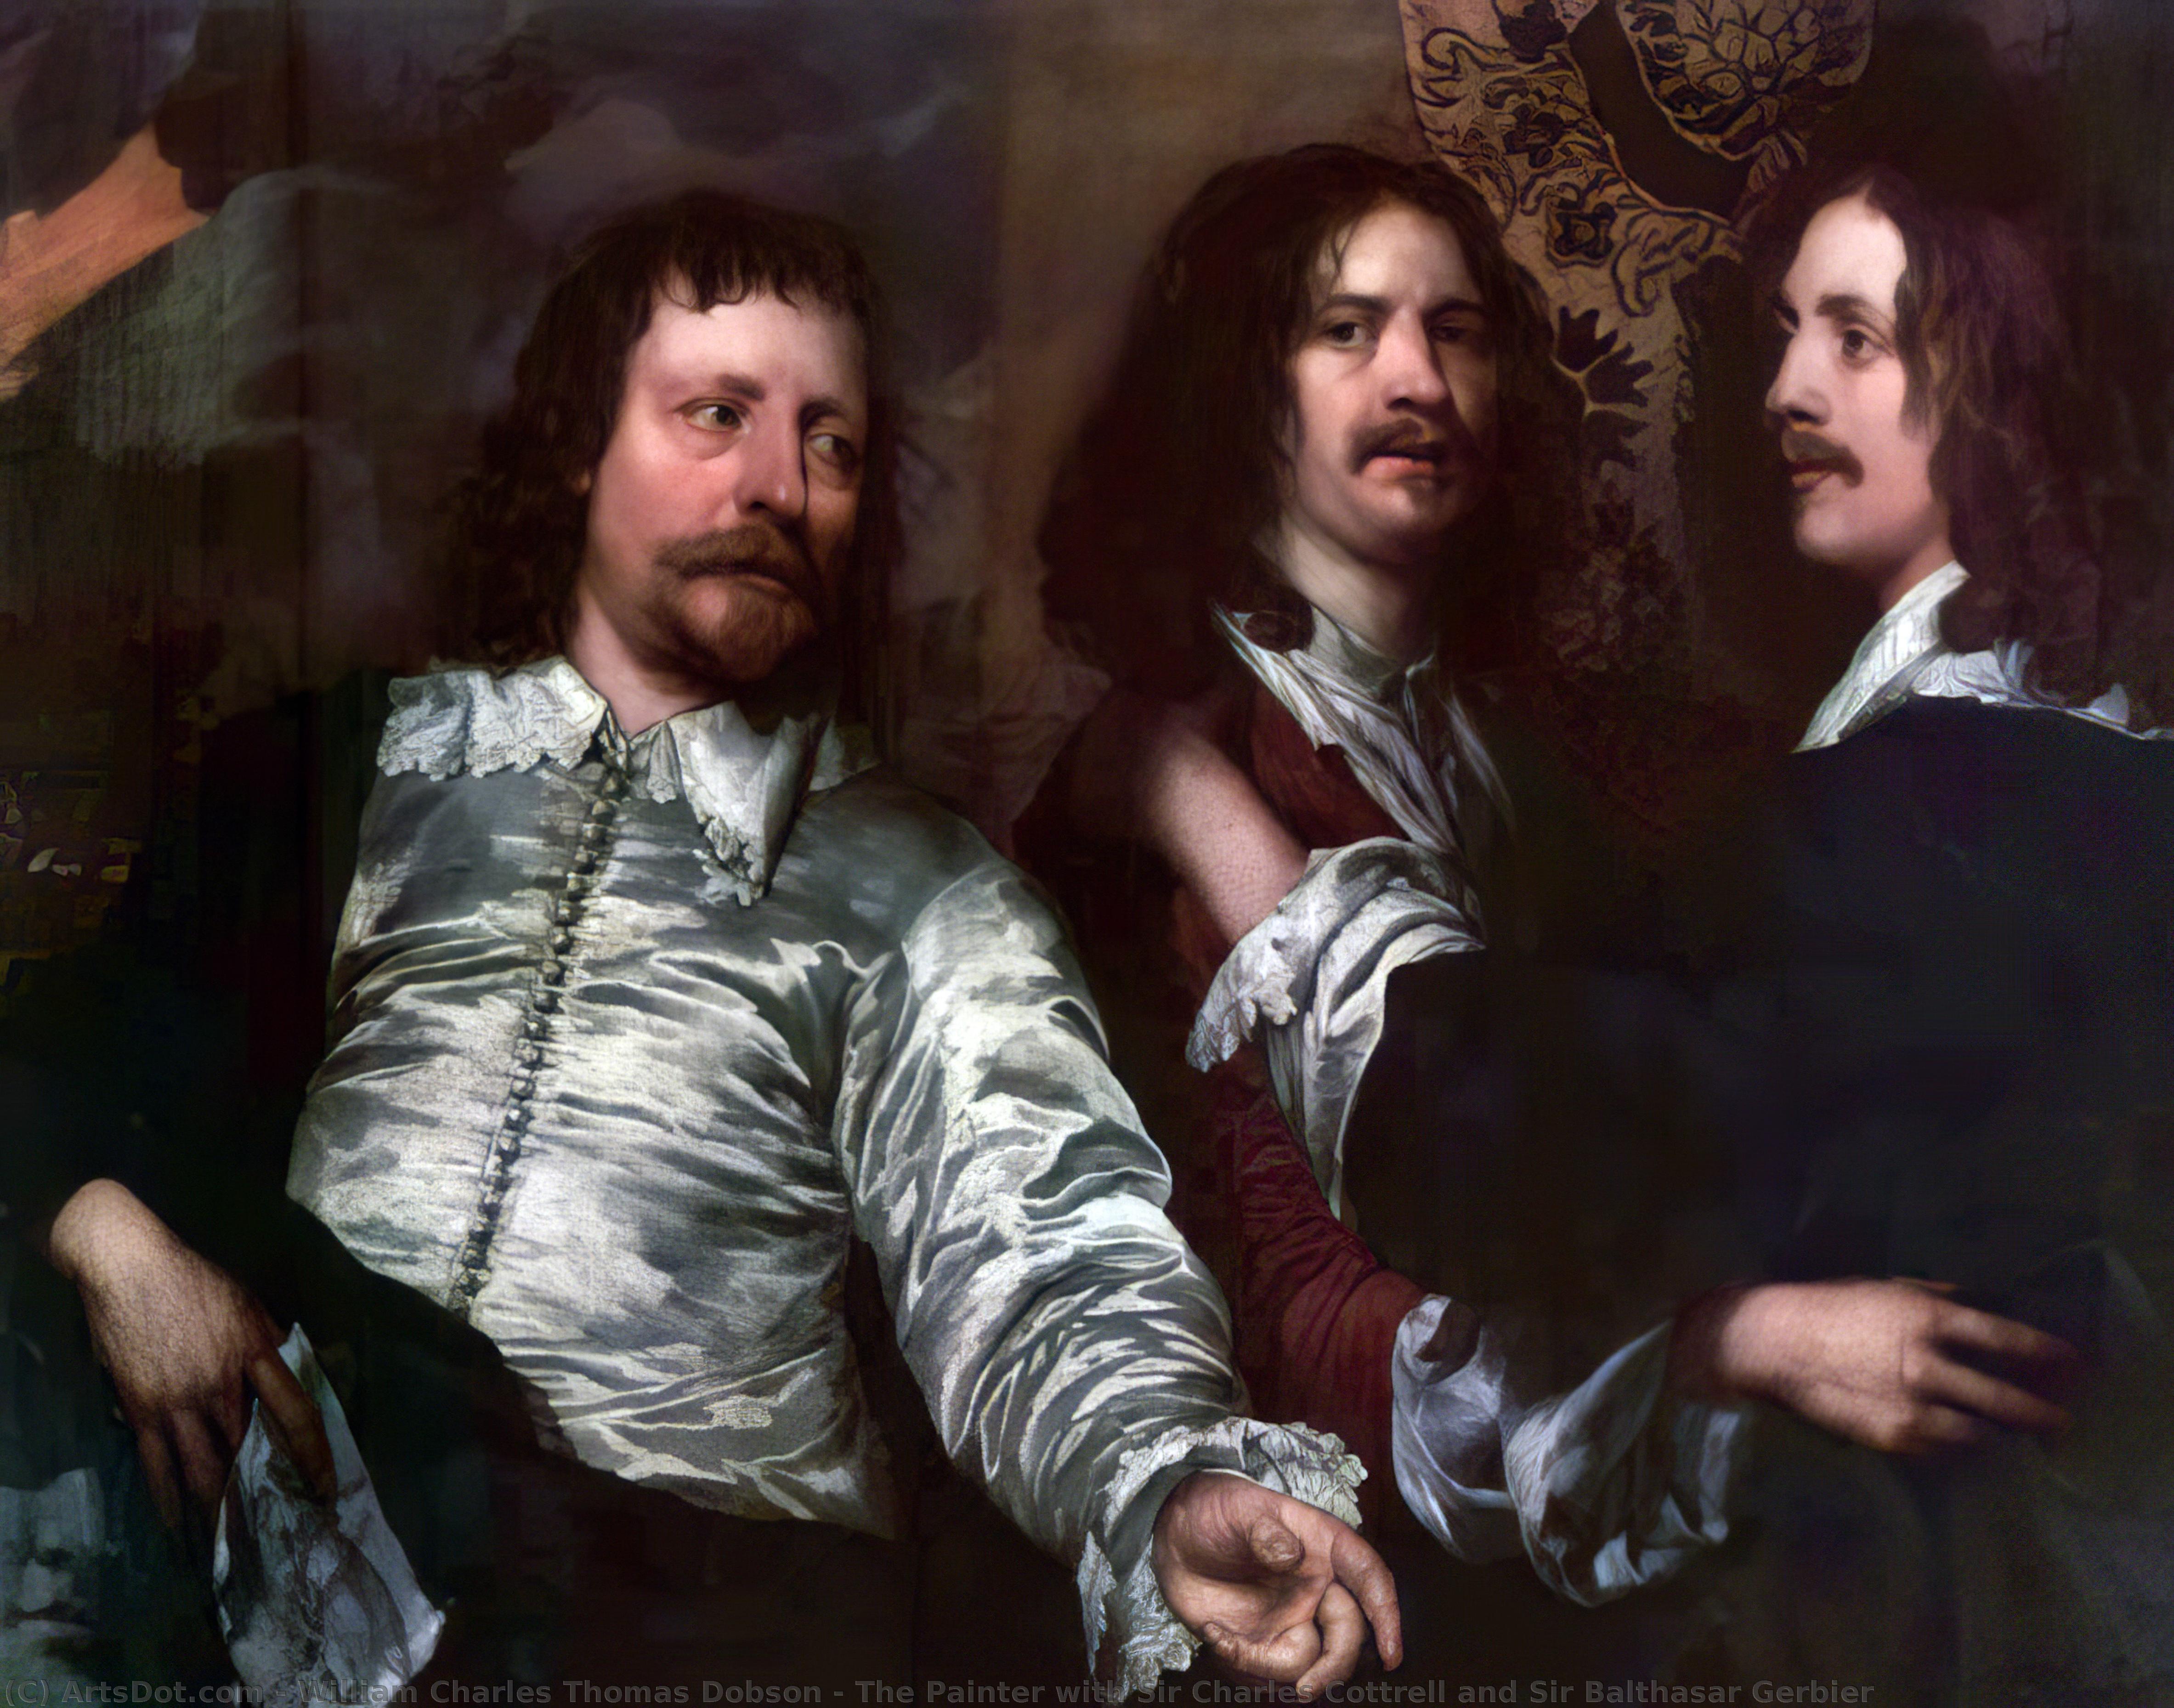 Order Oil Painting Replica The Painter with Sir Charles Cottrell and Sir Balthasar Gerbier by William Charles Thomas Dobson (1610-1646, Germany) | ArtsDot.com